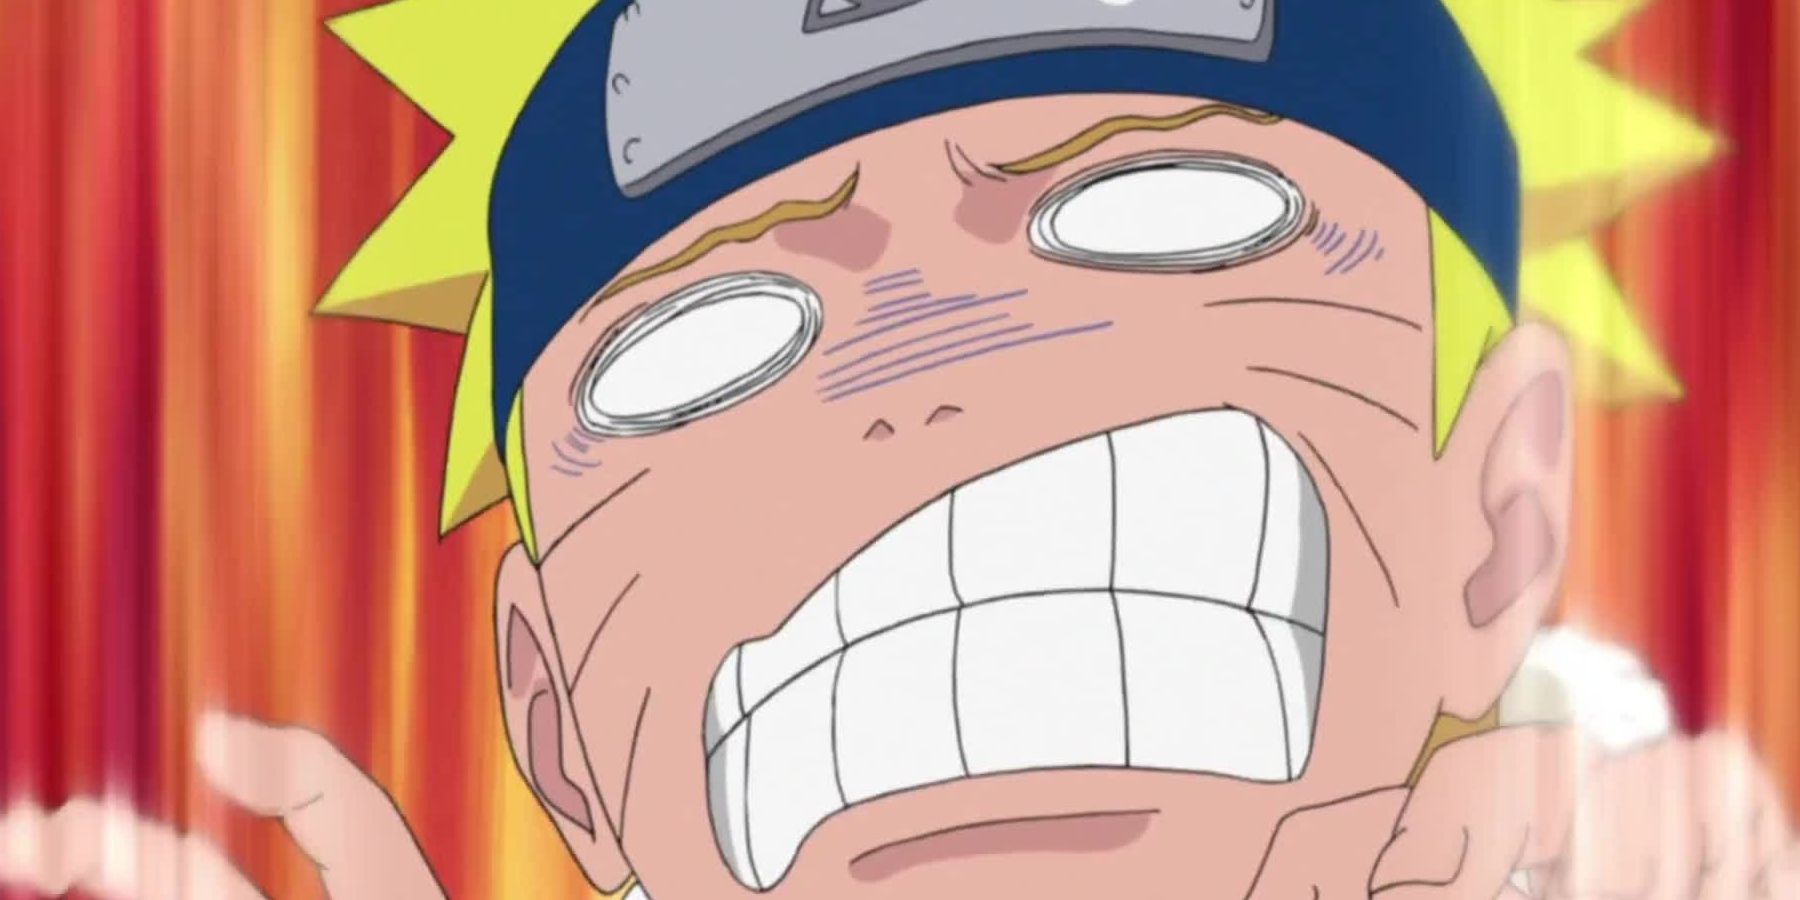 New Naruto Anime Episodes Release Date Delayed